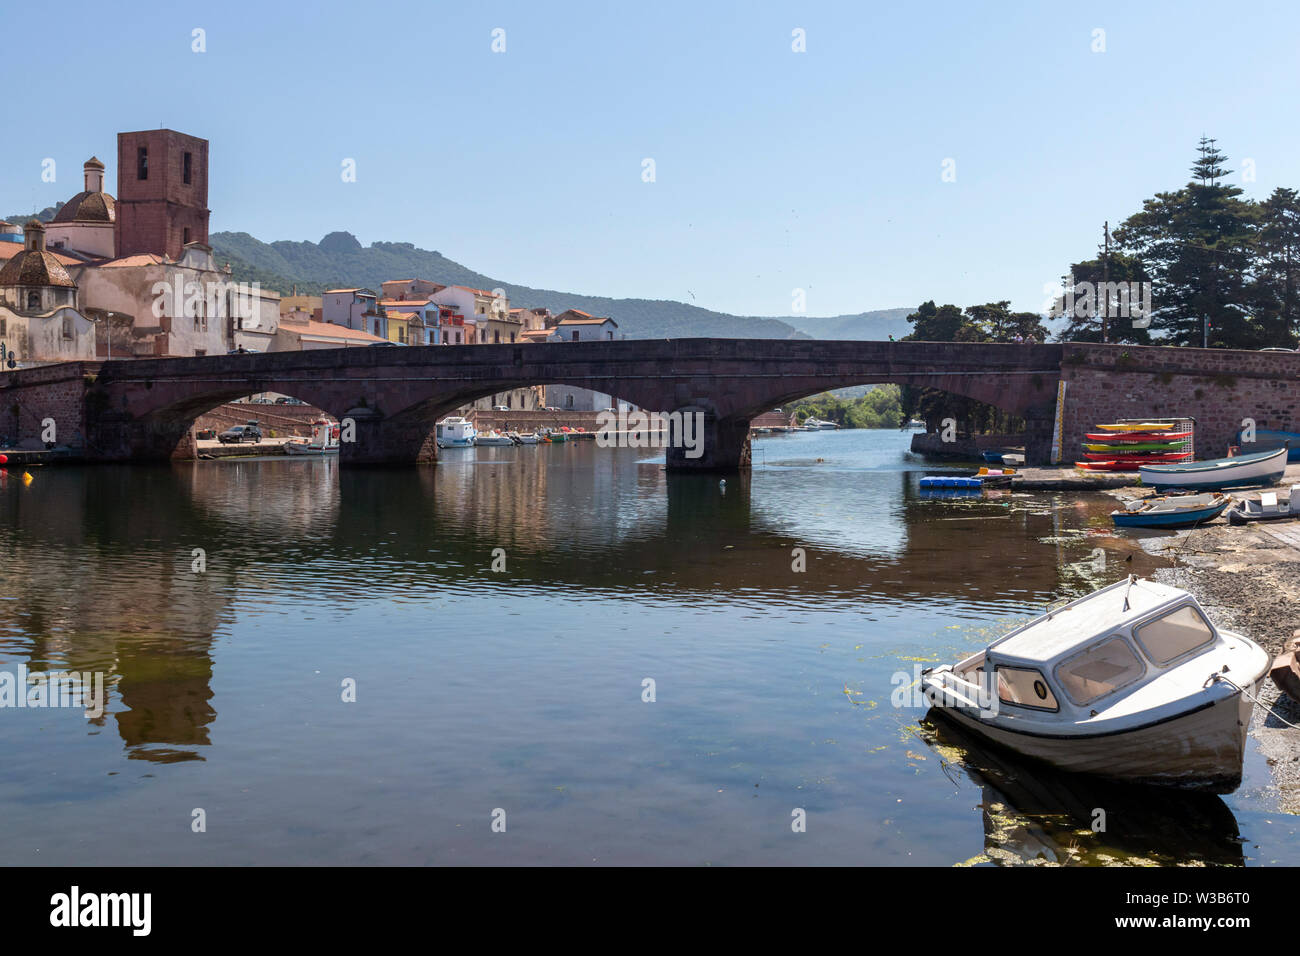 View of Bosa, Sardinia, with colorful Italian houses. River Temo with bridge and boat ashore in foreground. Summer day shot. Stock Photo